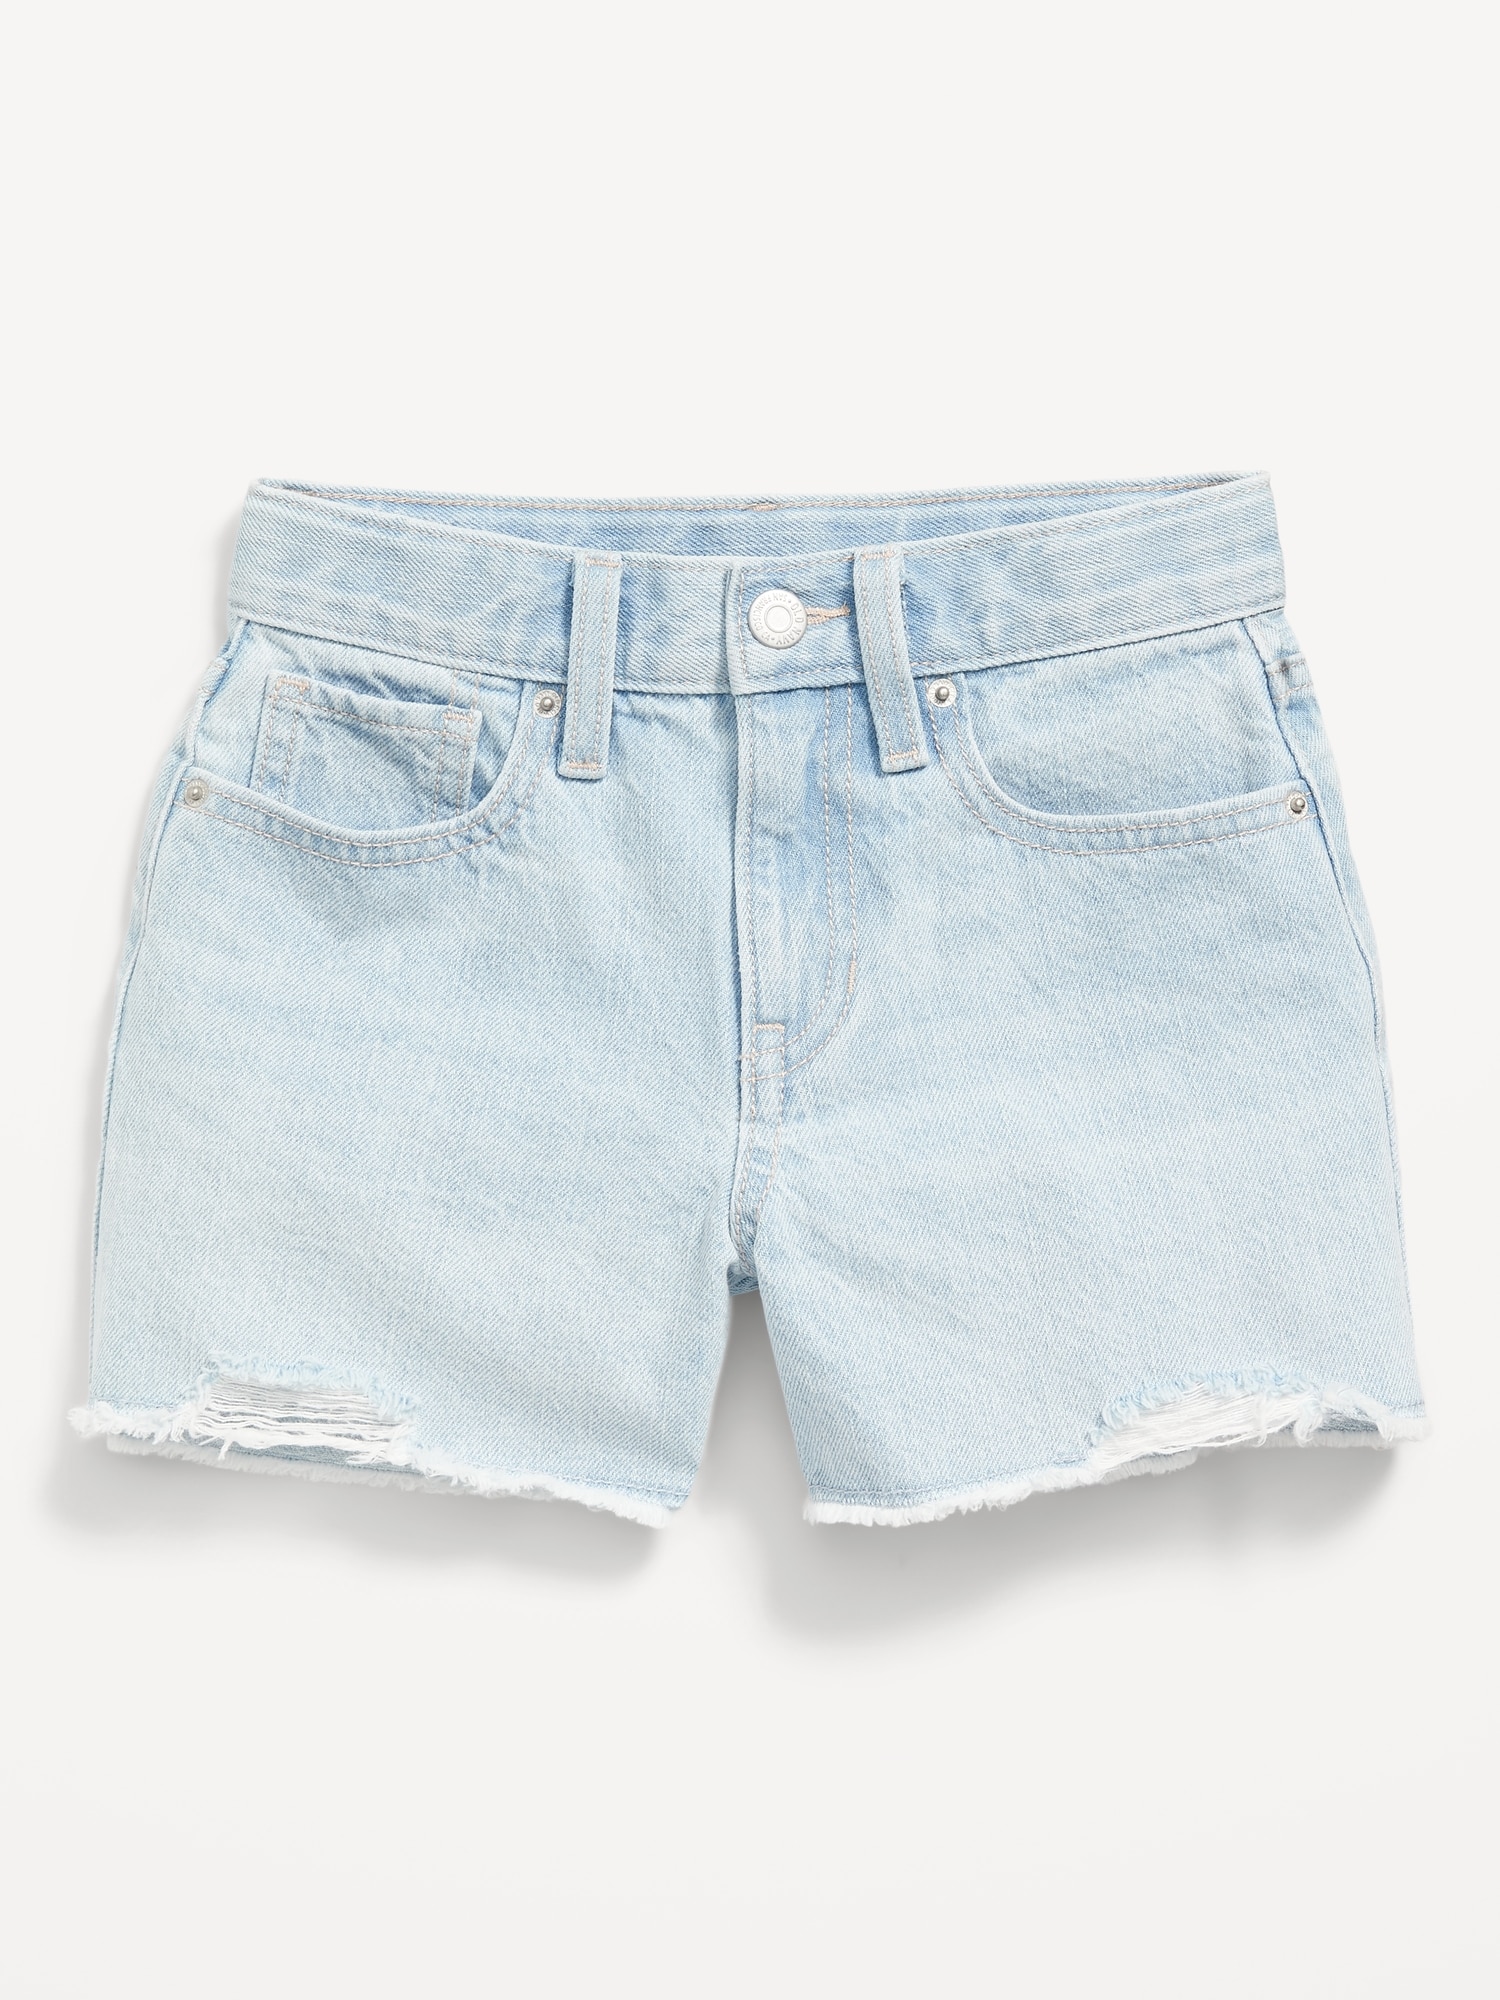 Old Navy Blue Ripped Jean Cut-Off Shorts Girls Size 6-12M NEW - beyond  exchange